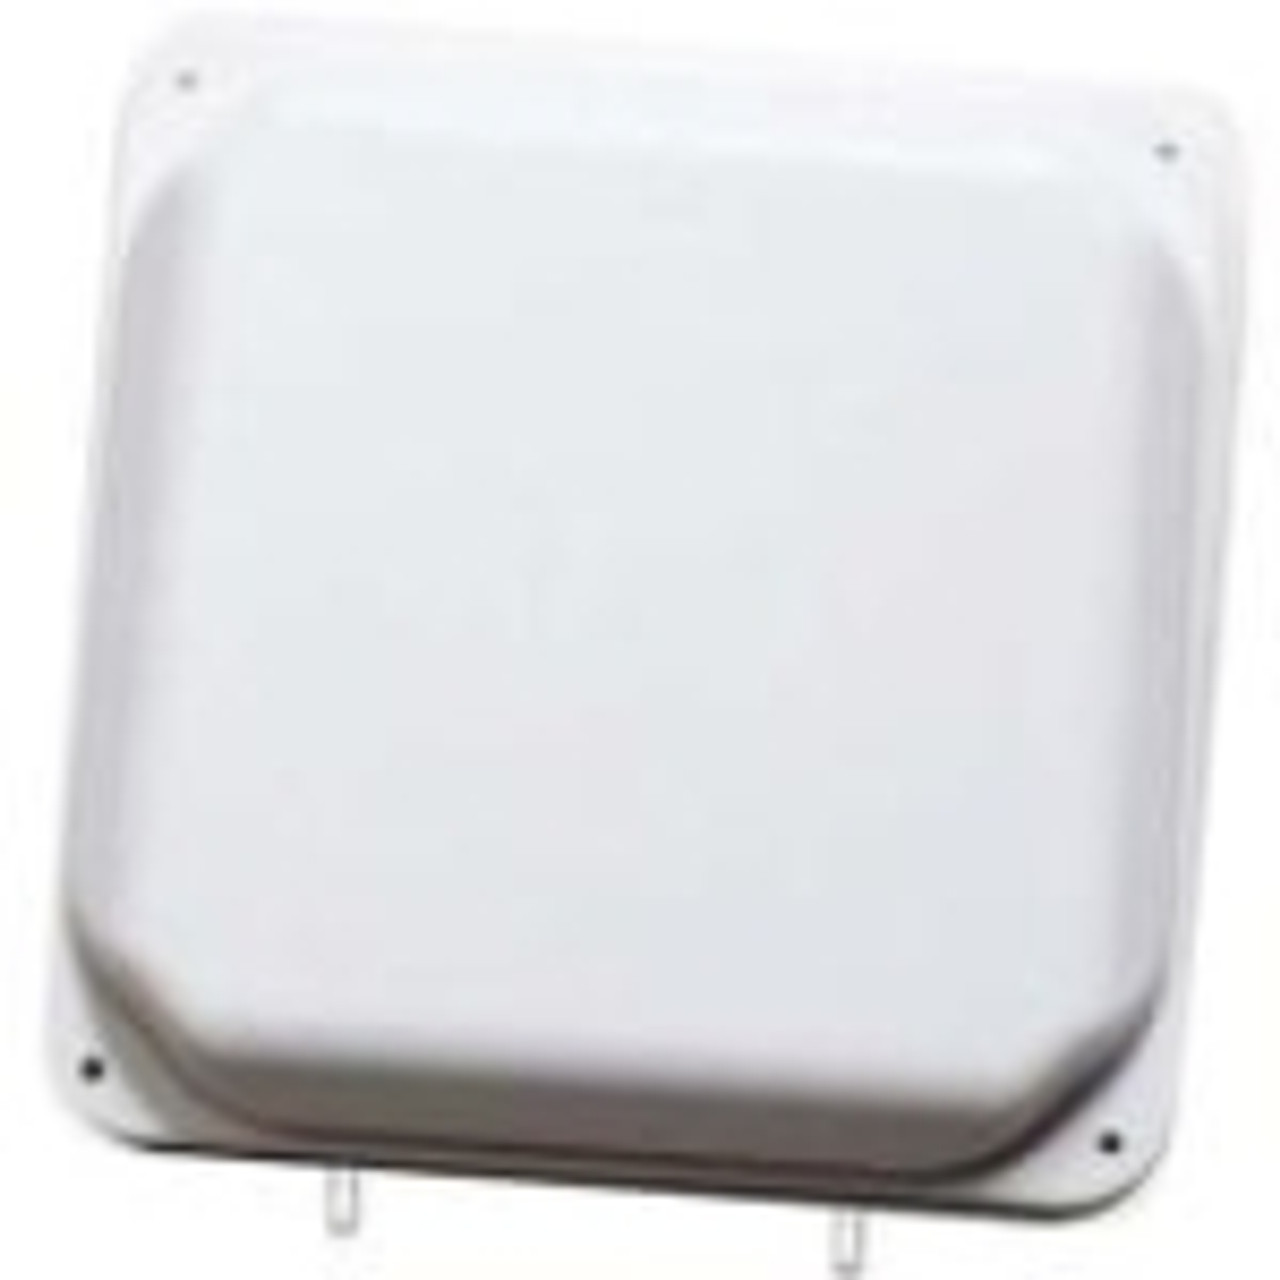 JW012A Aruba Indoor/Outdoor MIMO Antenna 2.40 GHz, 4.90 GHz to 2.50 GHz, 6 GHz 5 dBi Indoor, OutdoorPole/Wall Directional RP-SMA Connector